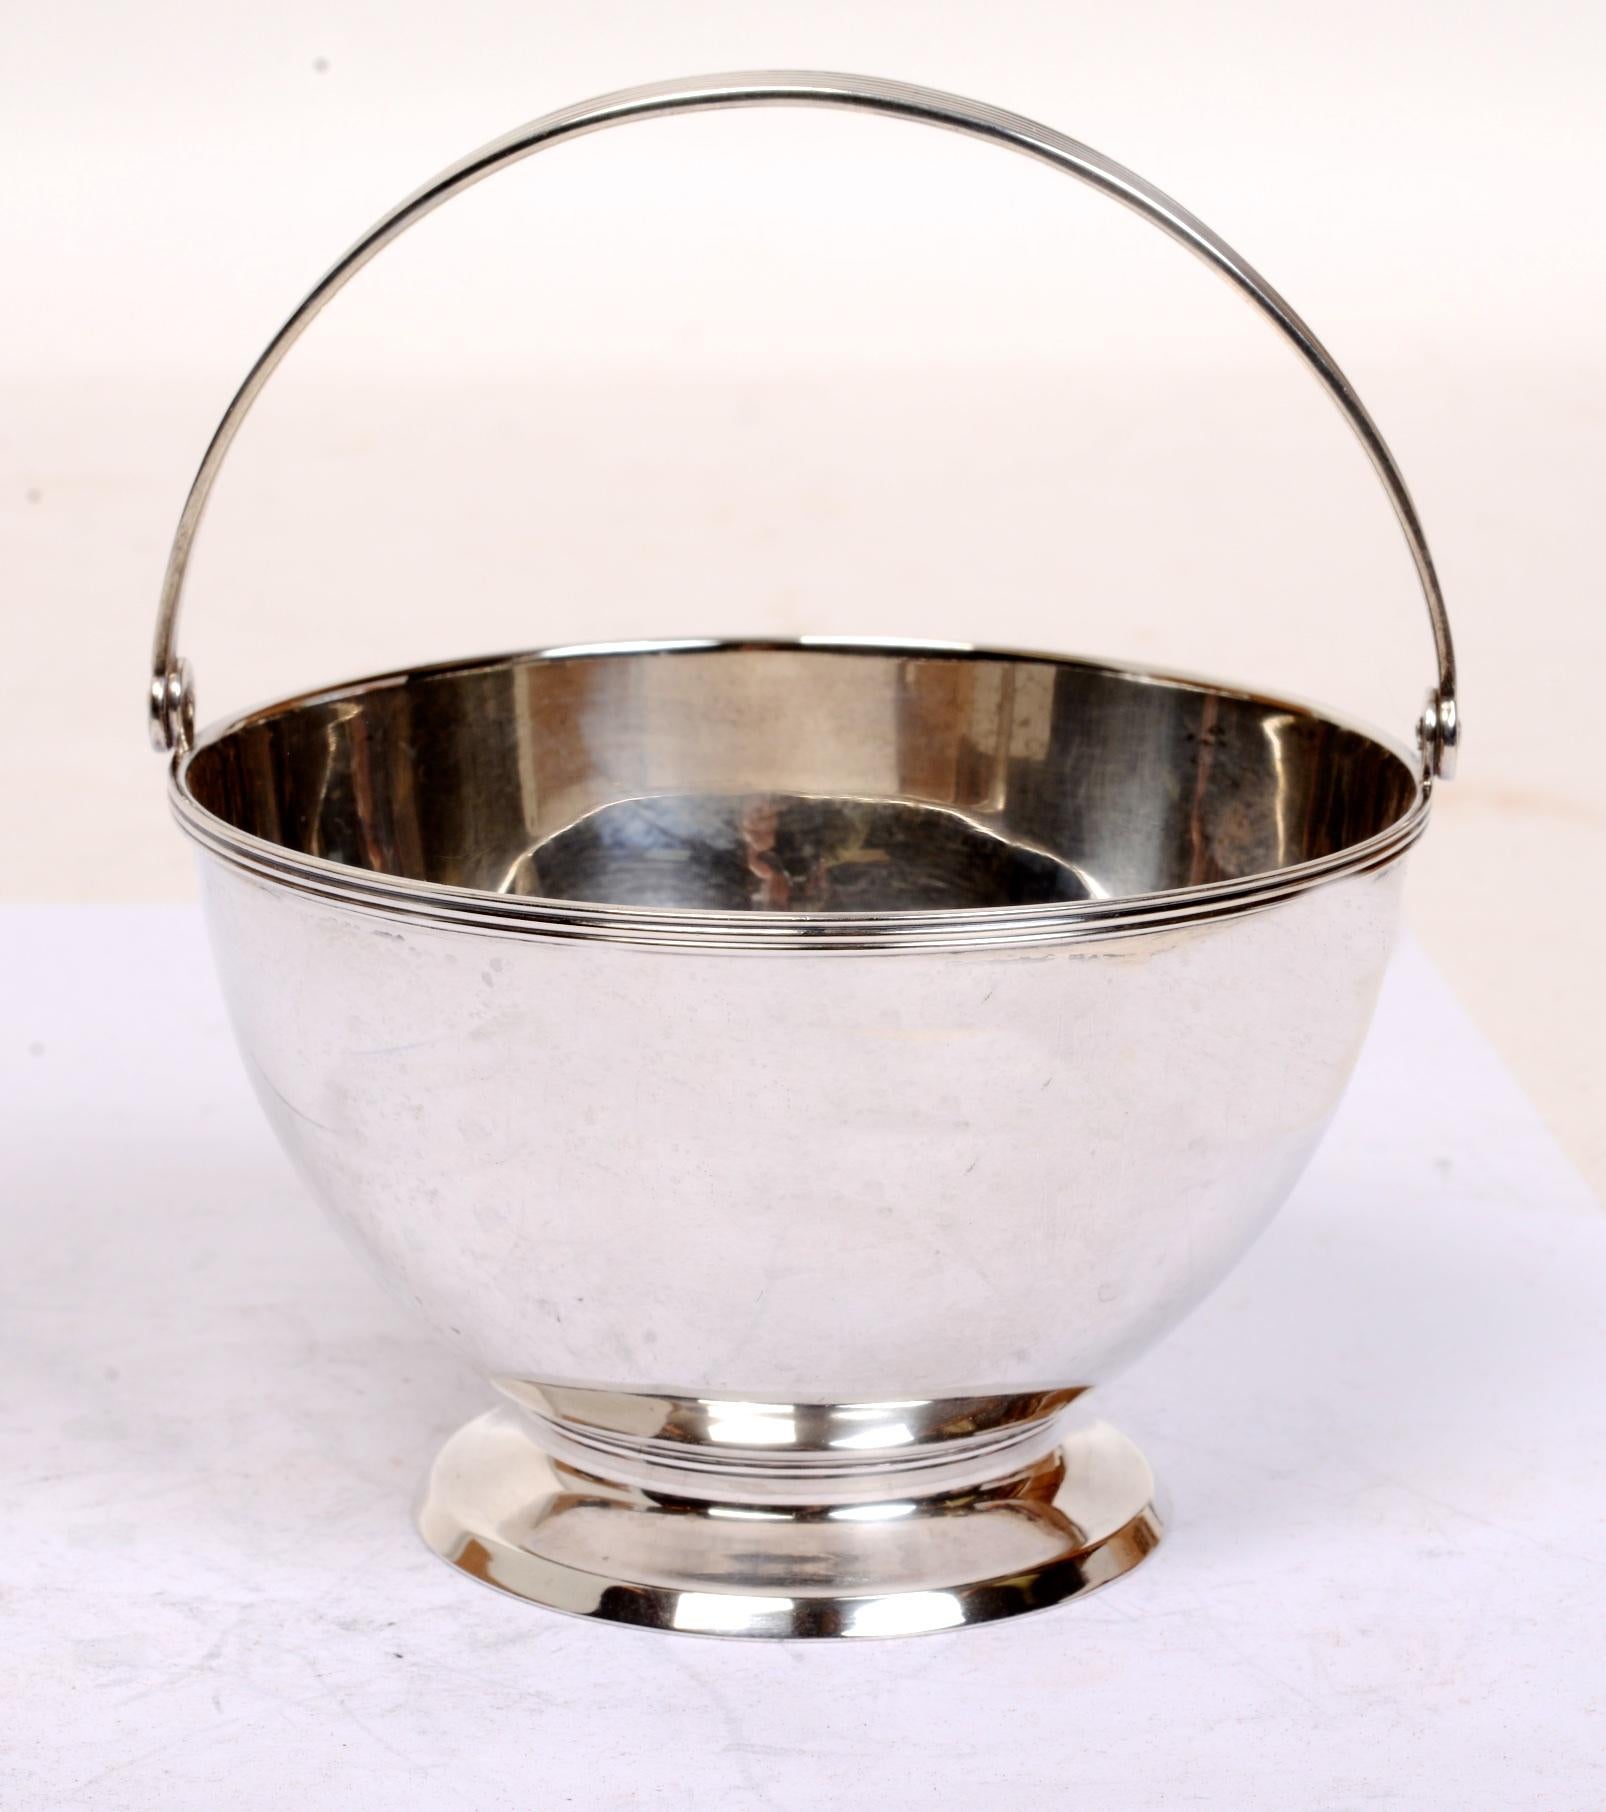 Tiffany & Co. sterling silver swing handle sugar bowl. The bowl's hallmarks date it to 1907-1947 when John C. MooreII was the chairman. The bowl is done in a simple, Classic form, with a reeded rim around the edge of the bowl and handle. The bowl